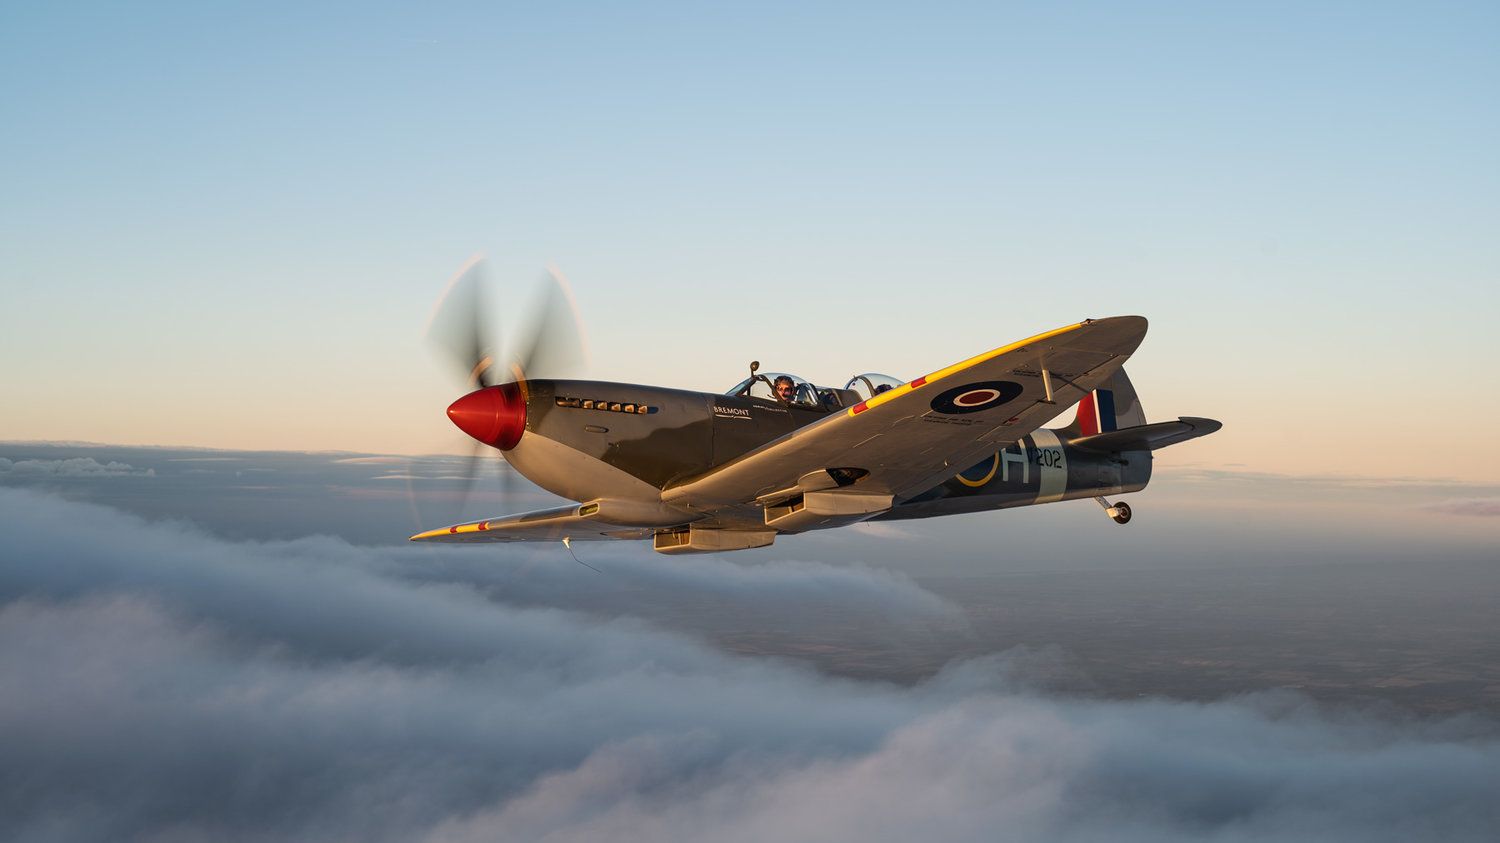 Spitfire Above Clouds